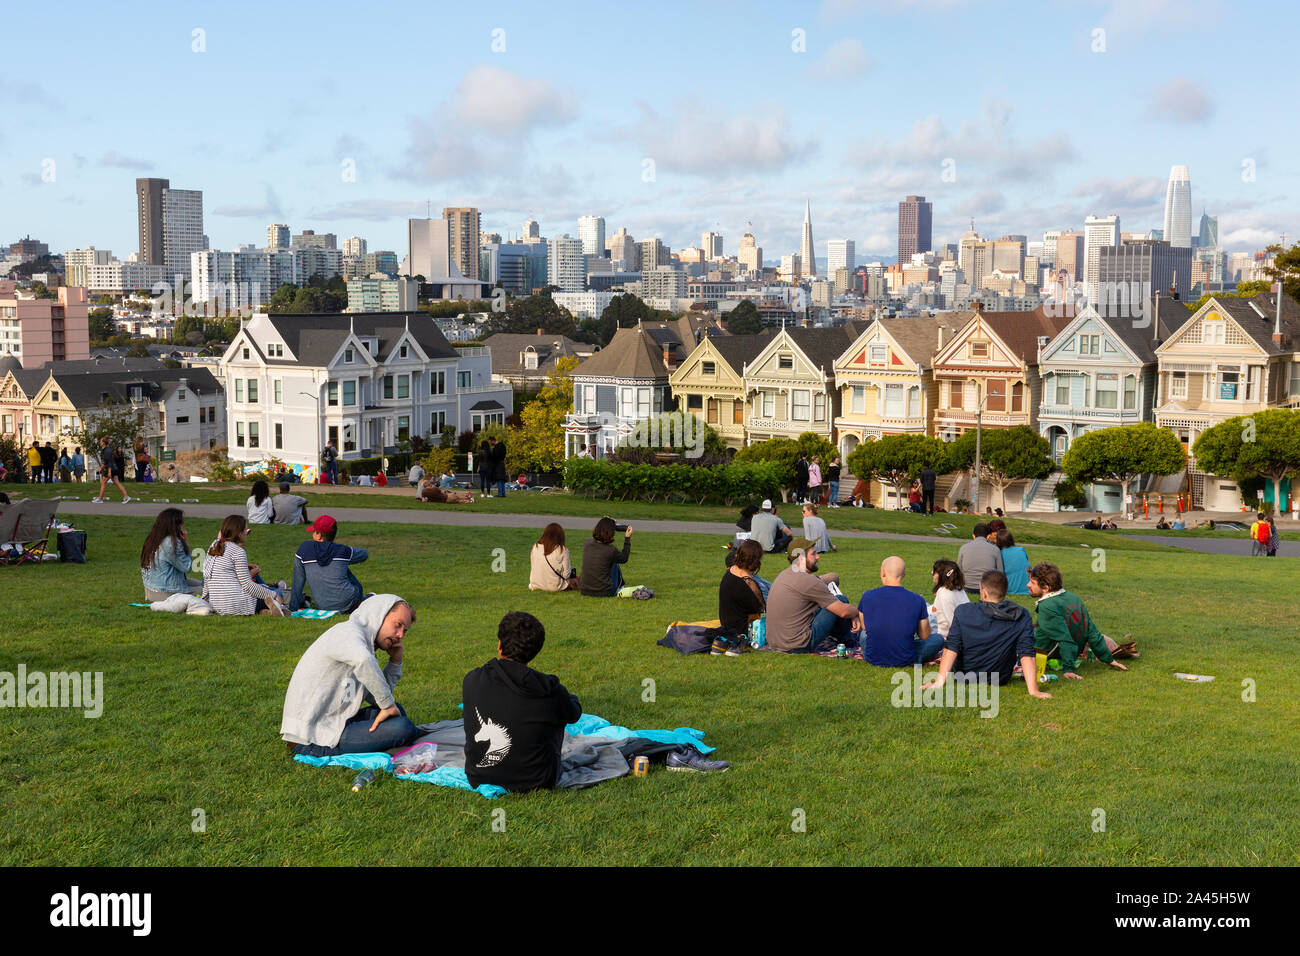 SAN FRANCISCO, USA - SEPTEMBER  8, 2019 : People relaxing in Alamo Square Park on a warm day with a view of the famous Painted Ladies and city skyline Stock Photo